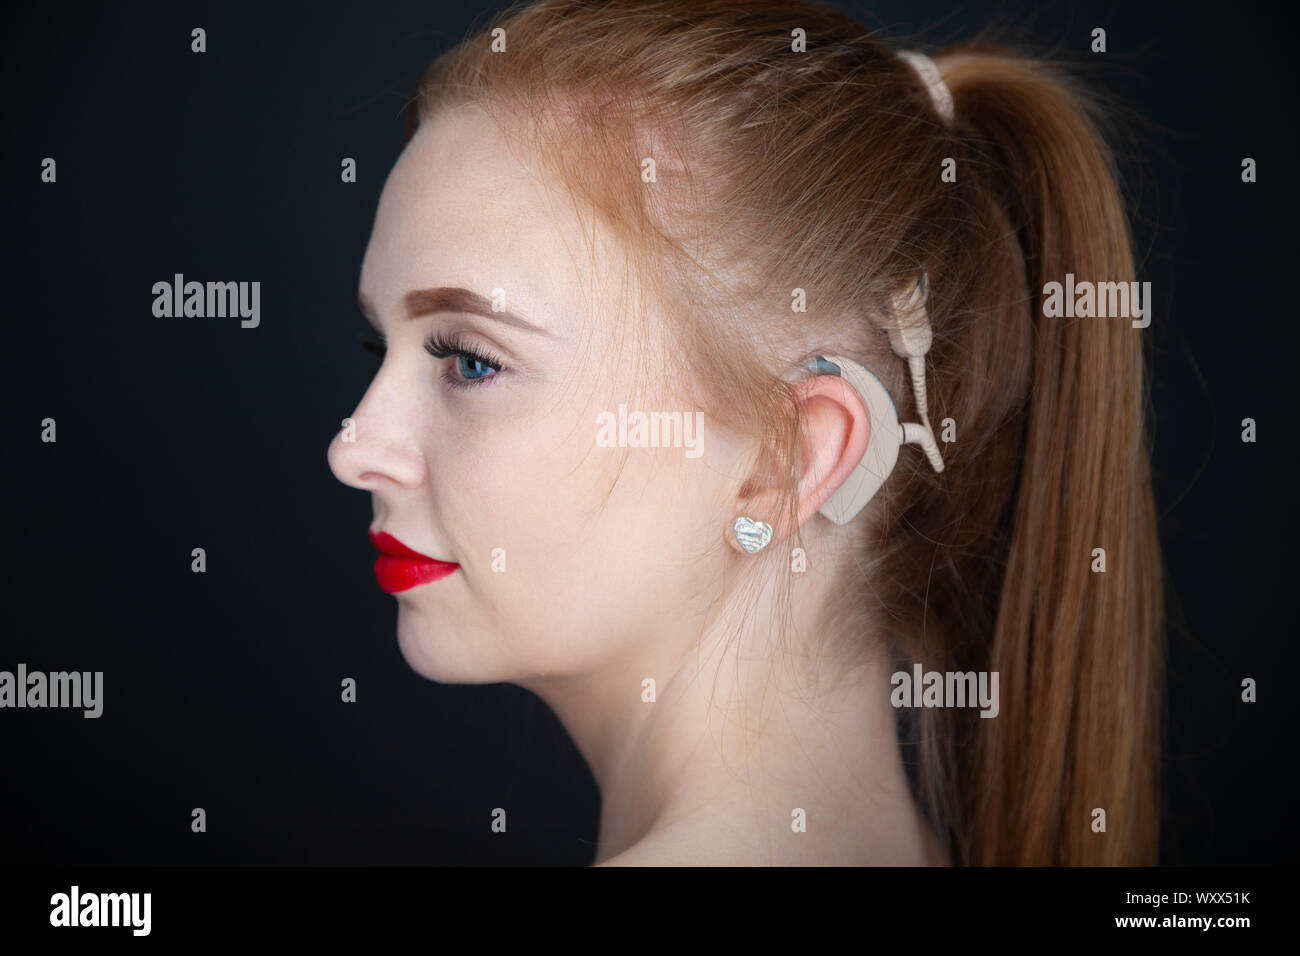 A portrait of a beautiful young woman who has a cochlear implant. Stock Photo